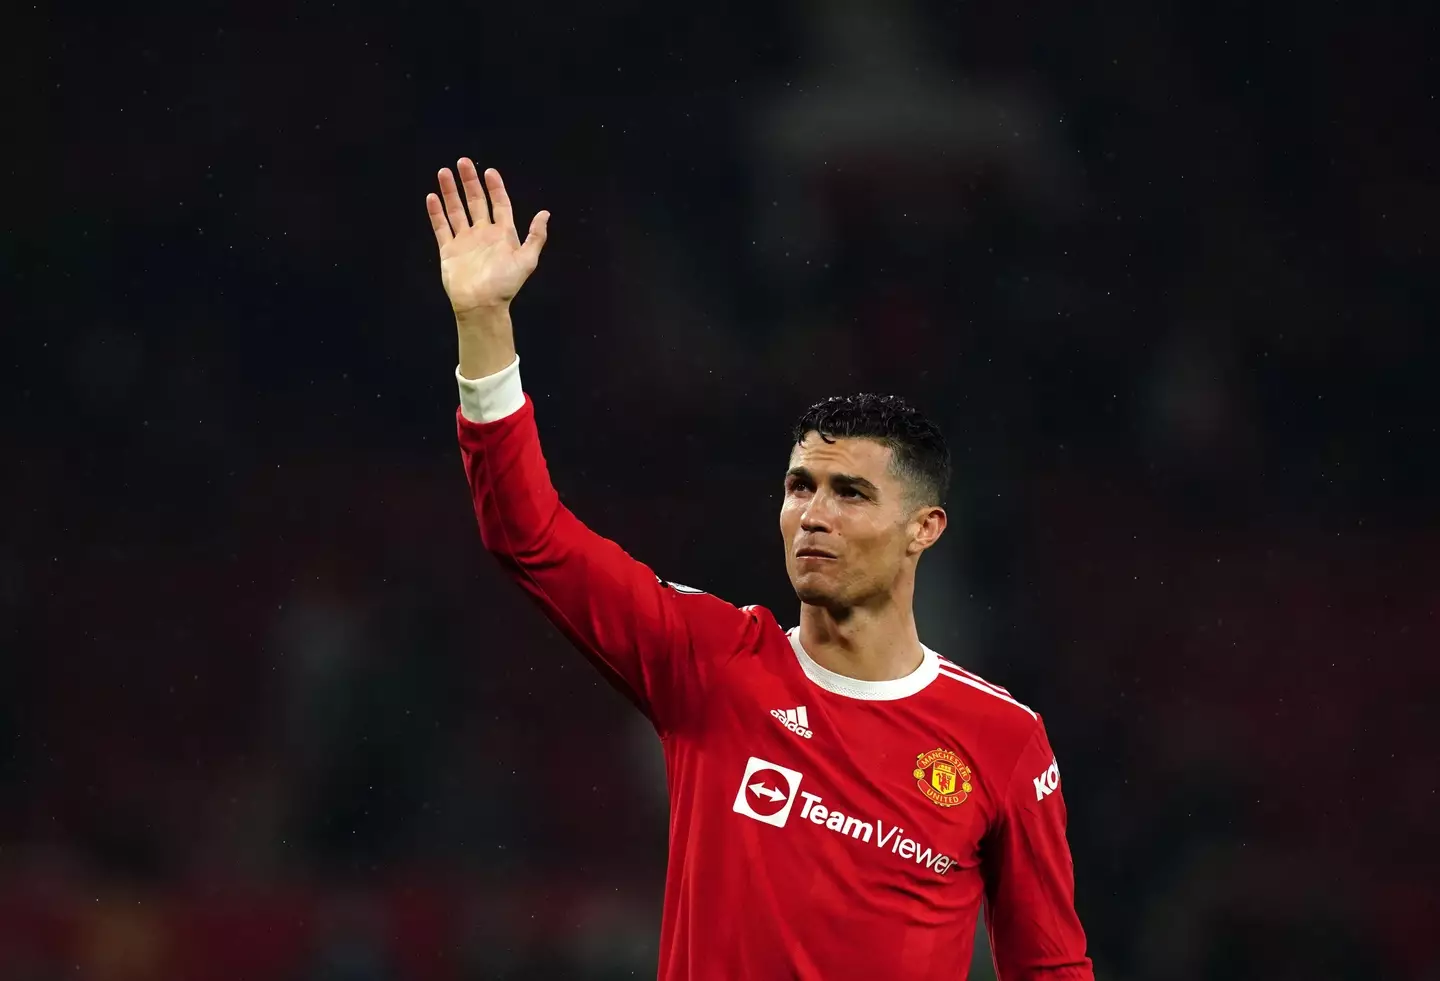 Ronaldo is entering the final year of his current deal at United (Image: PA)